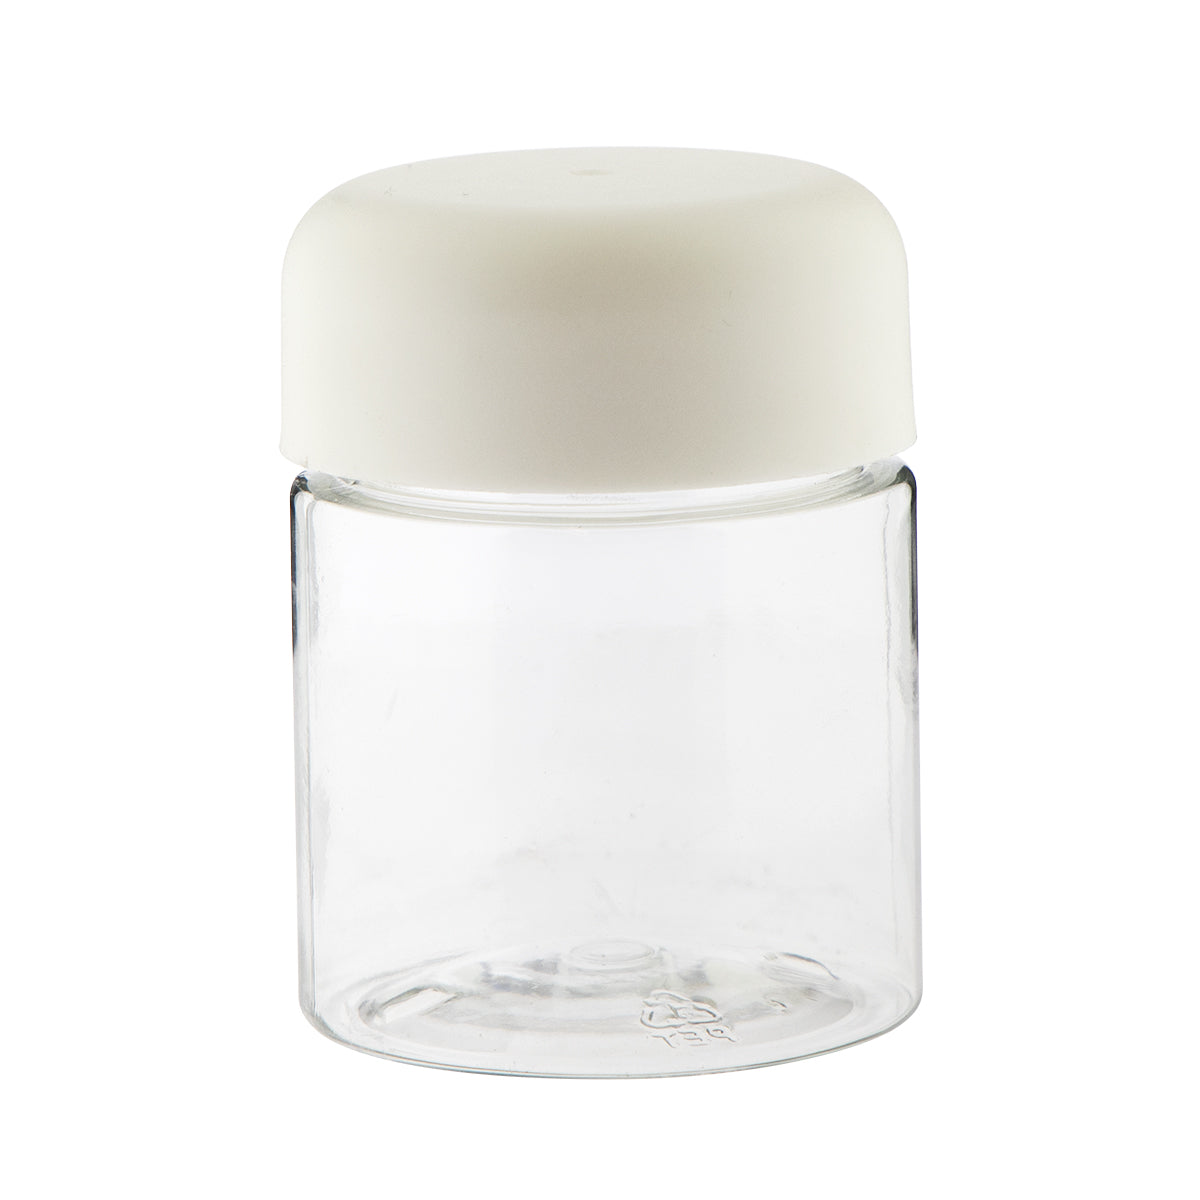 Child Resistant | Straight Sided Plastic Jars w/ Dome Caps - Clear/White | 53mm - 4oz - 100 Count